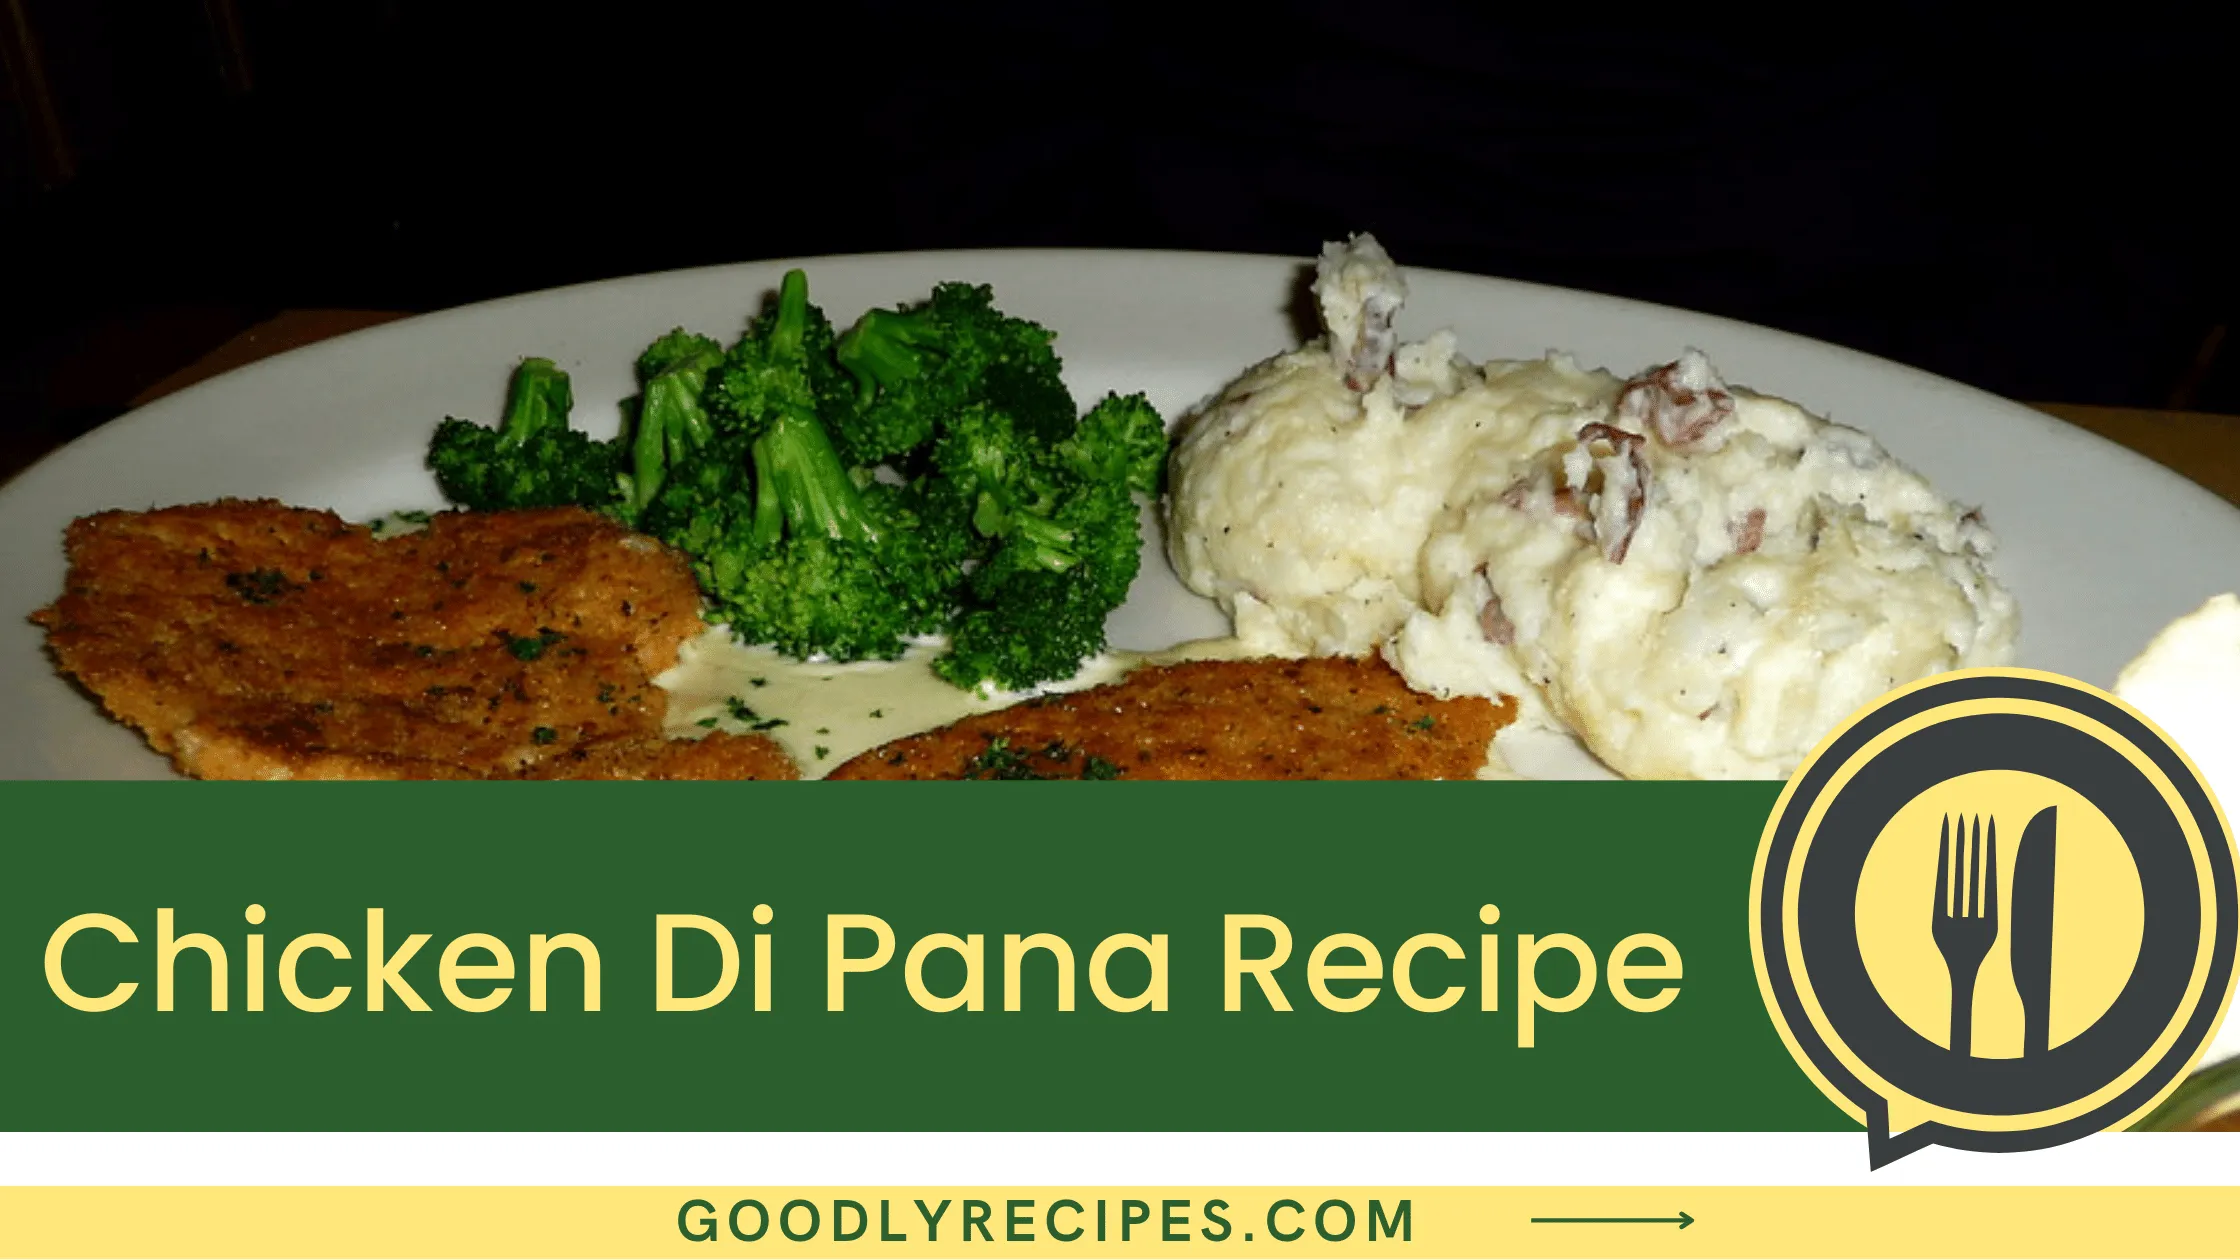 What Is Chicken Di Pana?